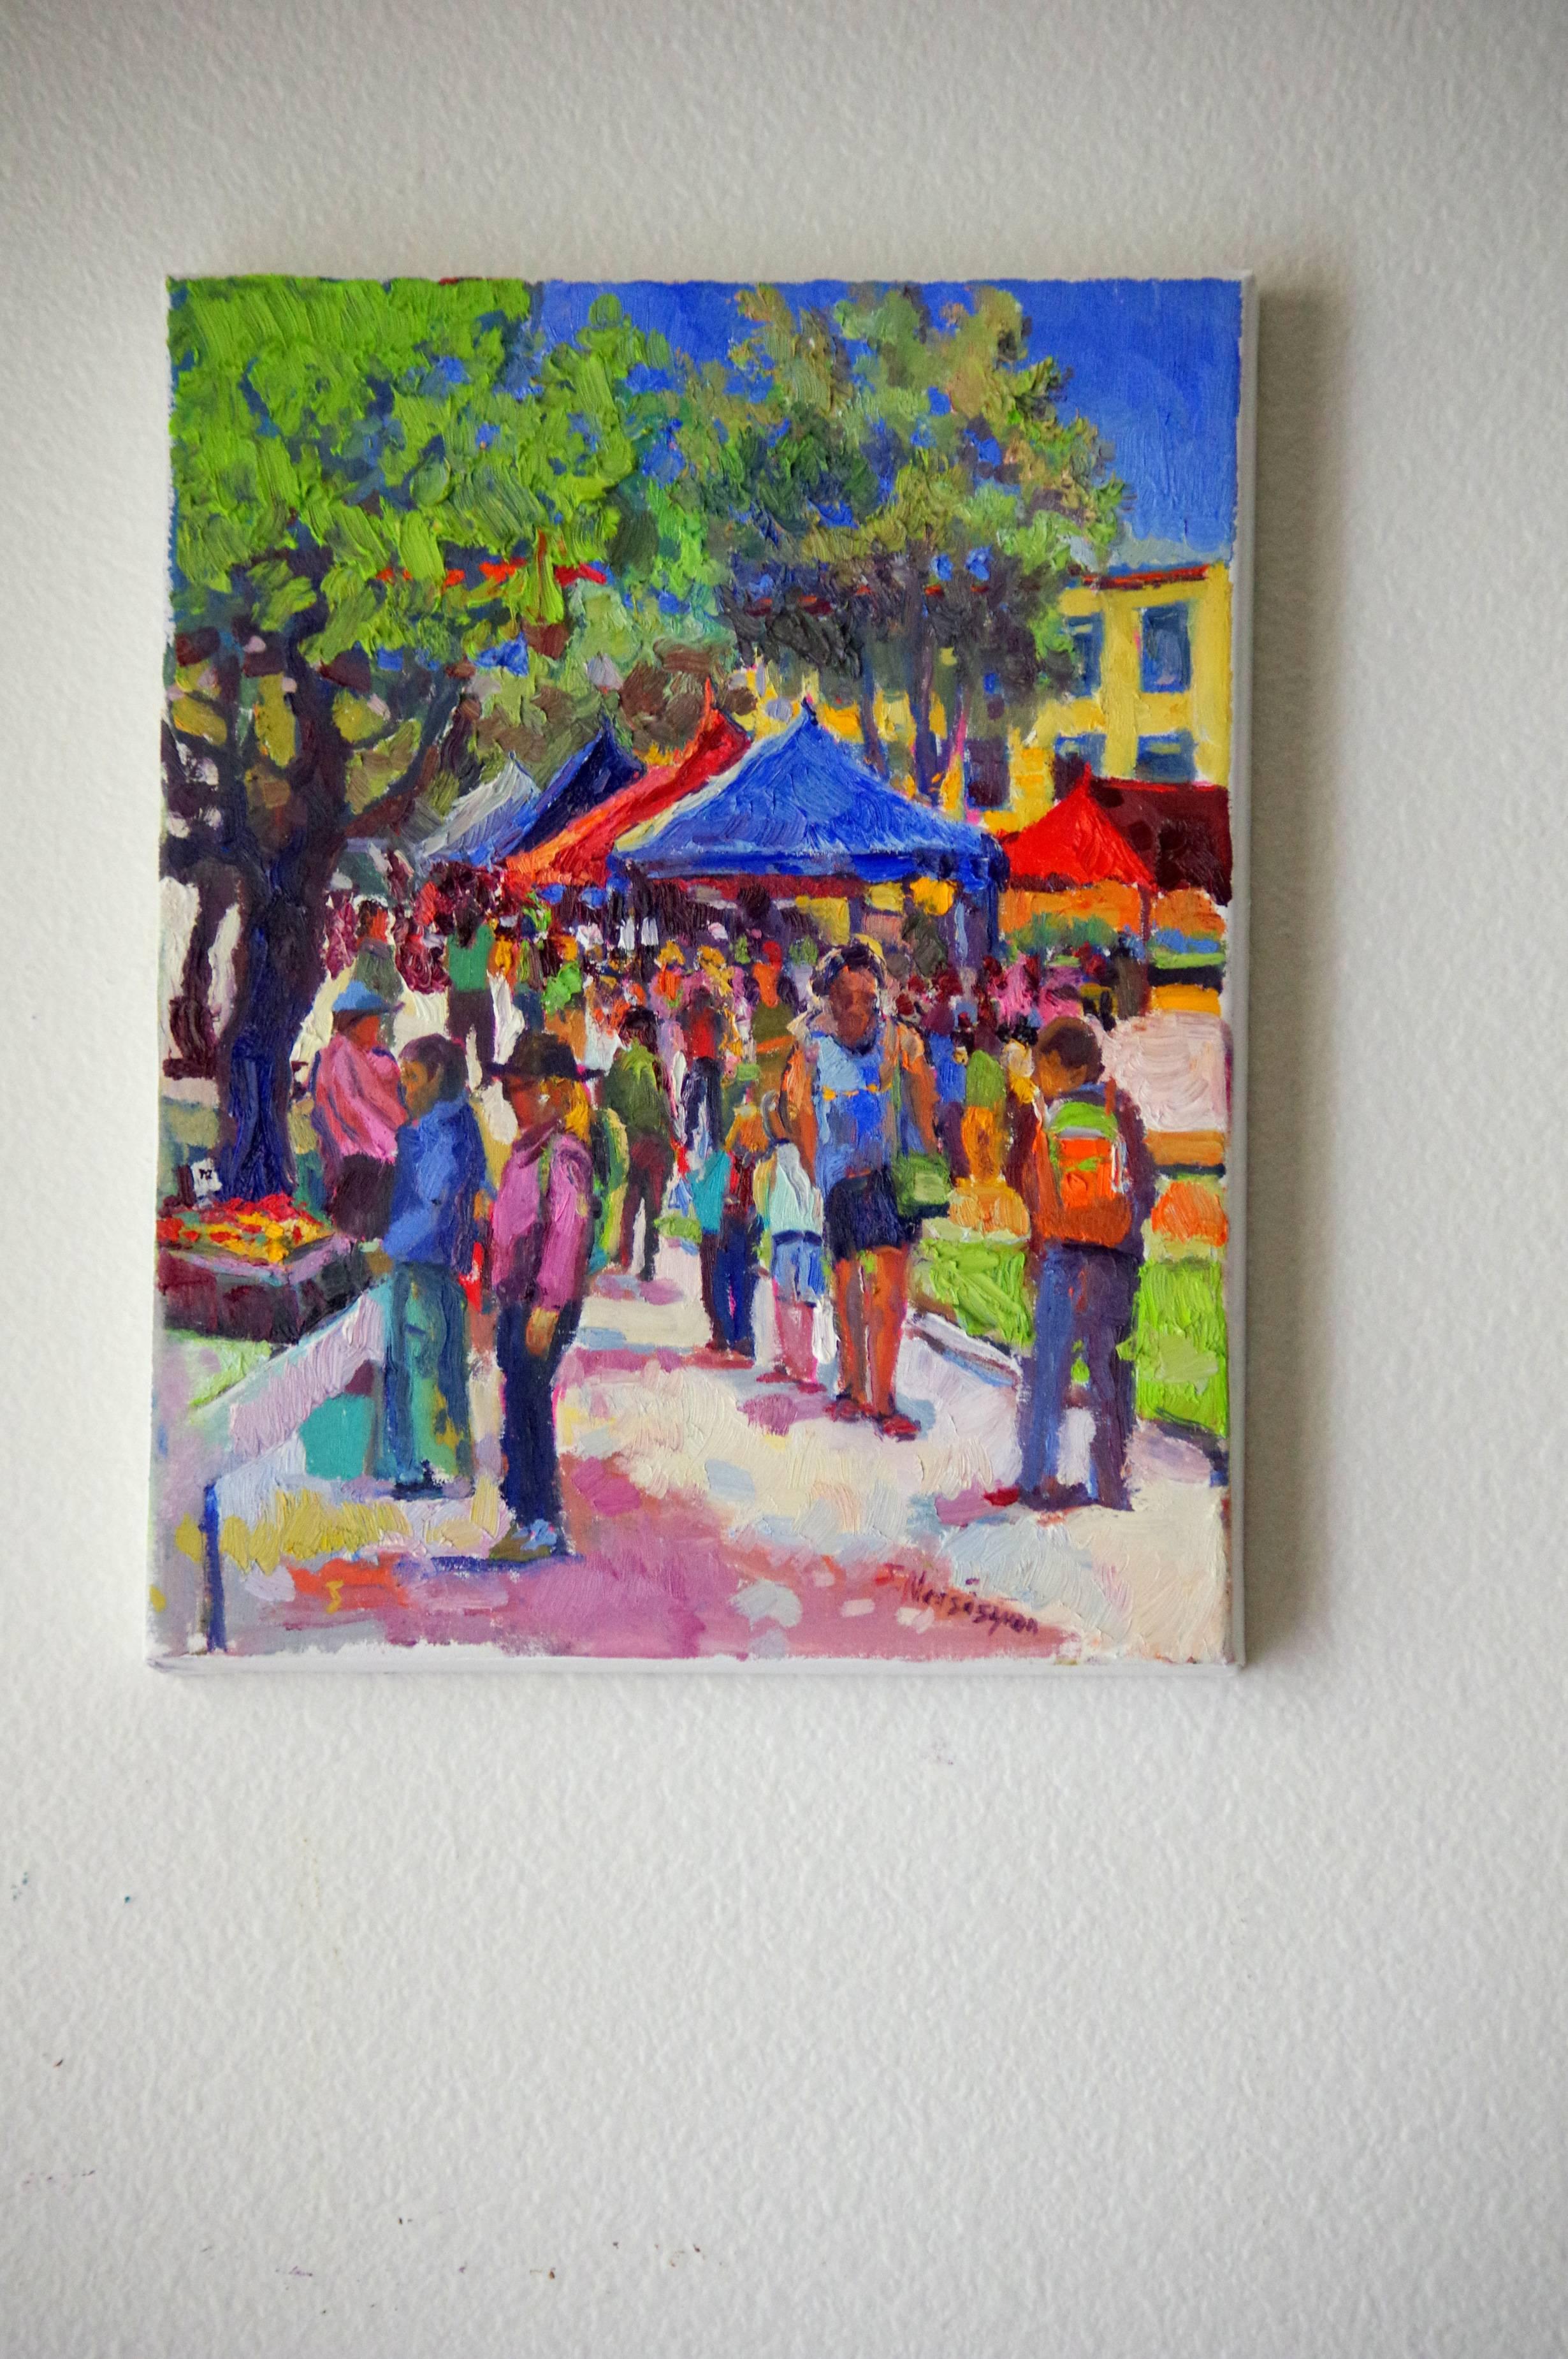 Farmers Market - Impressionist Painting by Suren Nersisyan